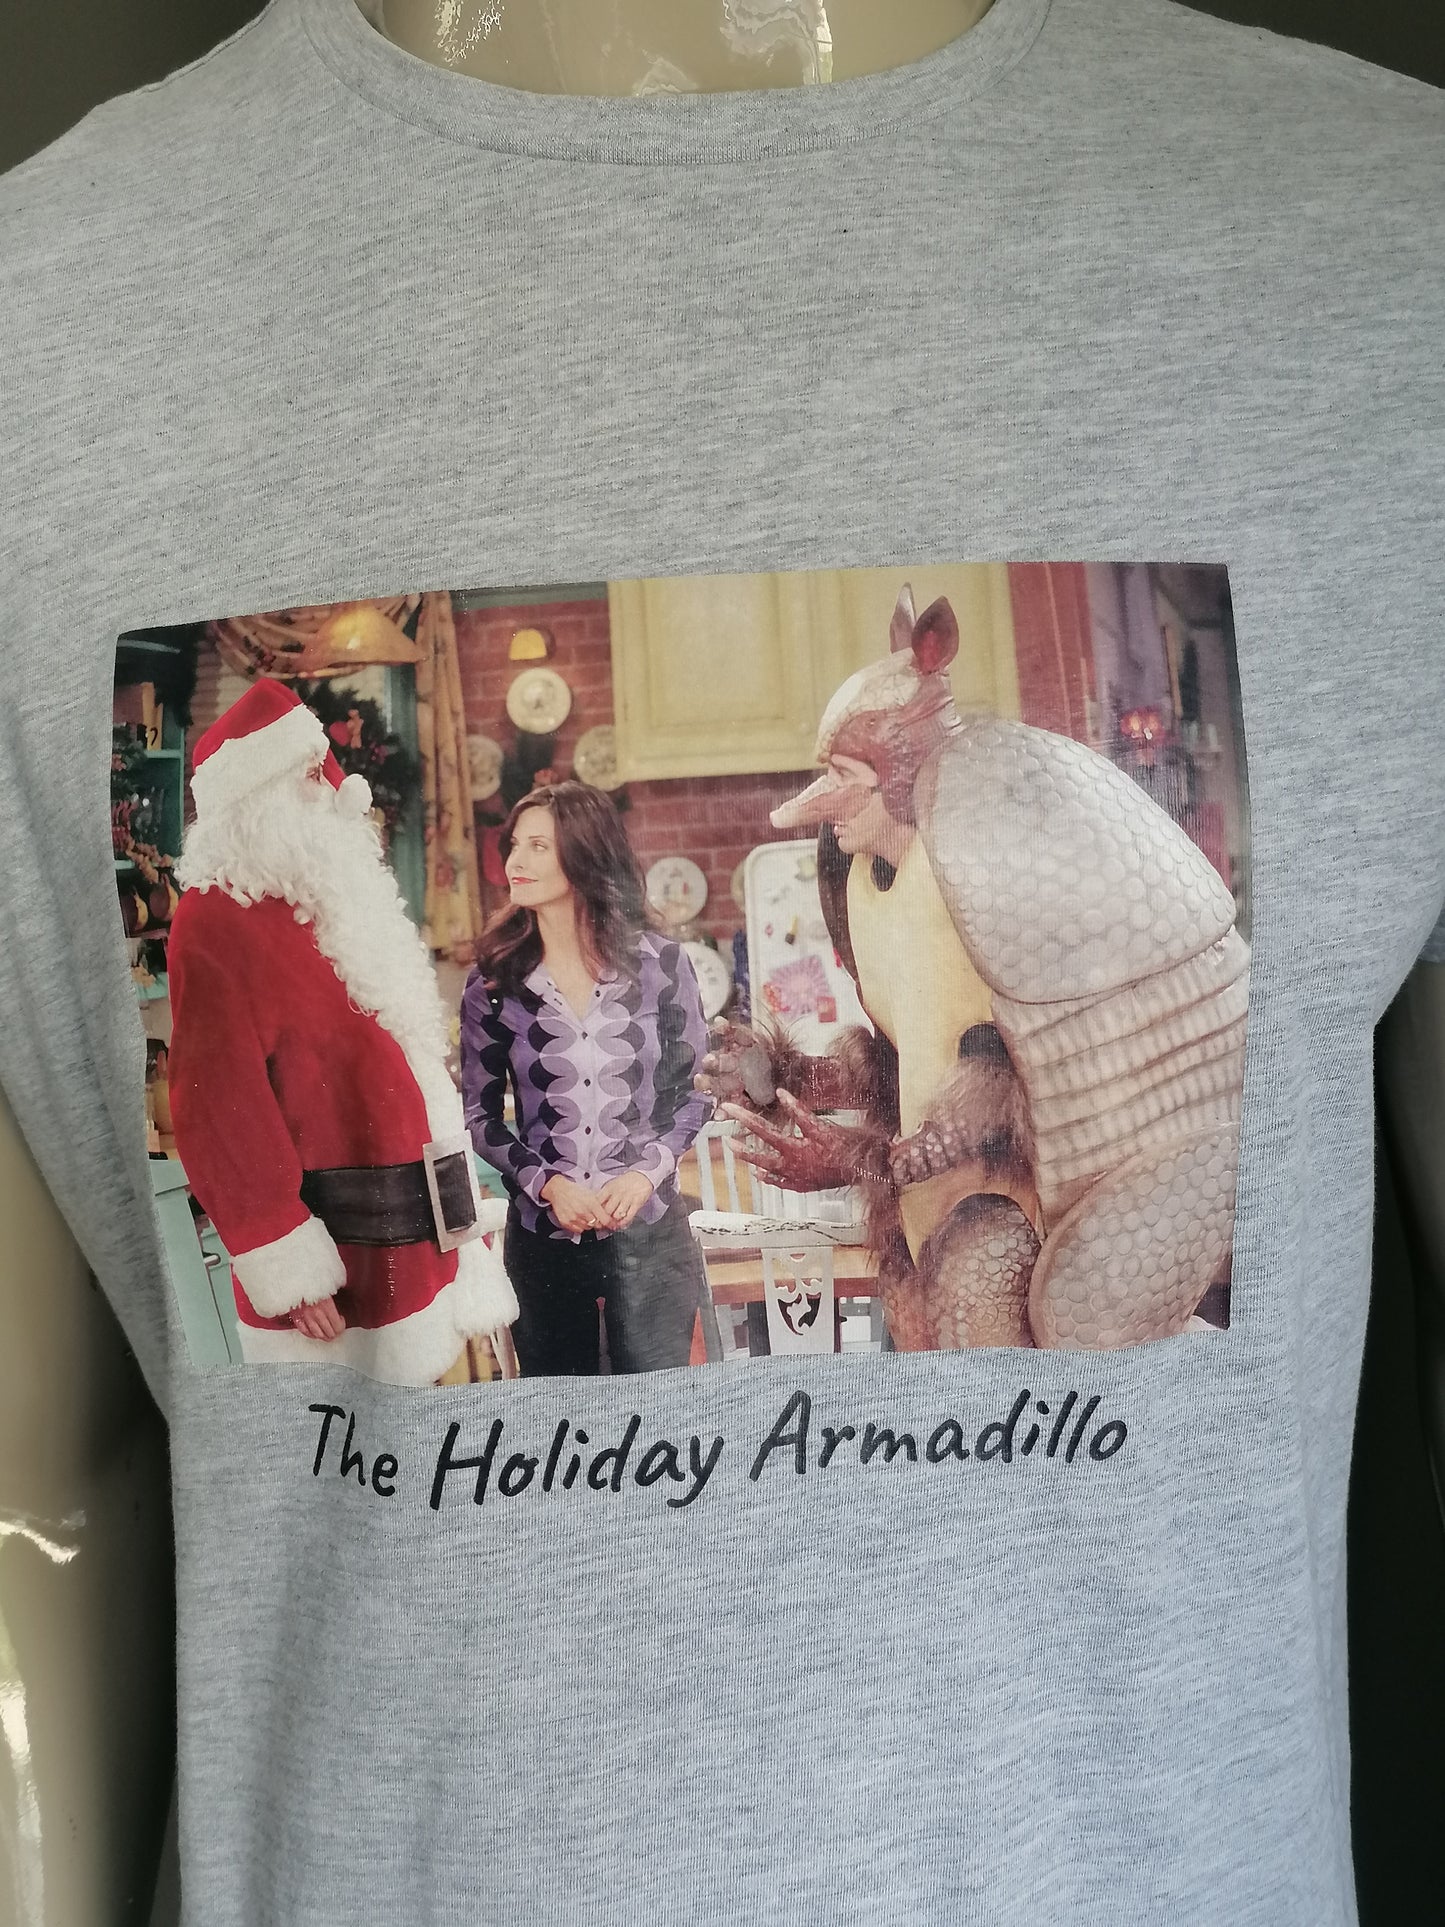 Vintage Original Friends Shirt "Holiday Armadillo". Gray with print. Size XL.